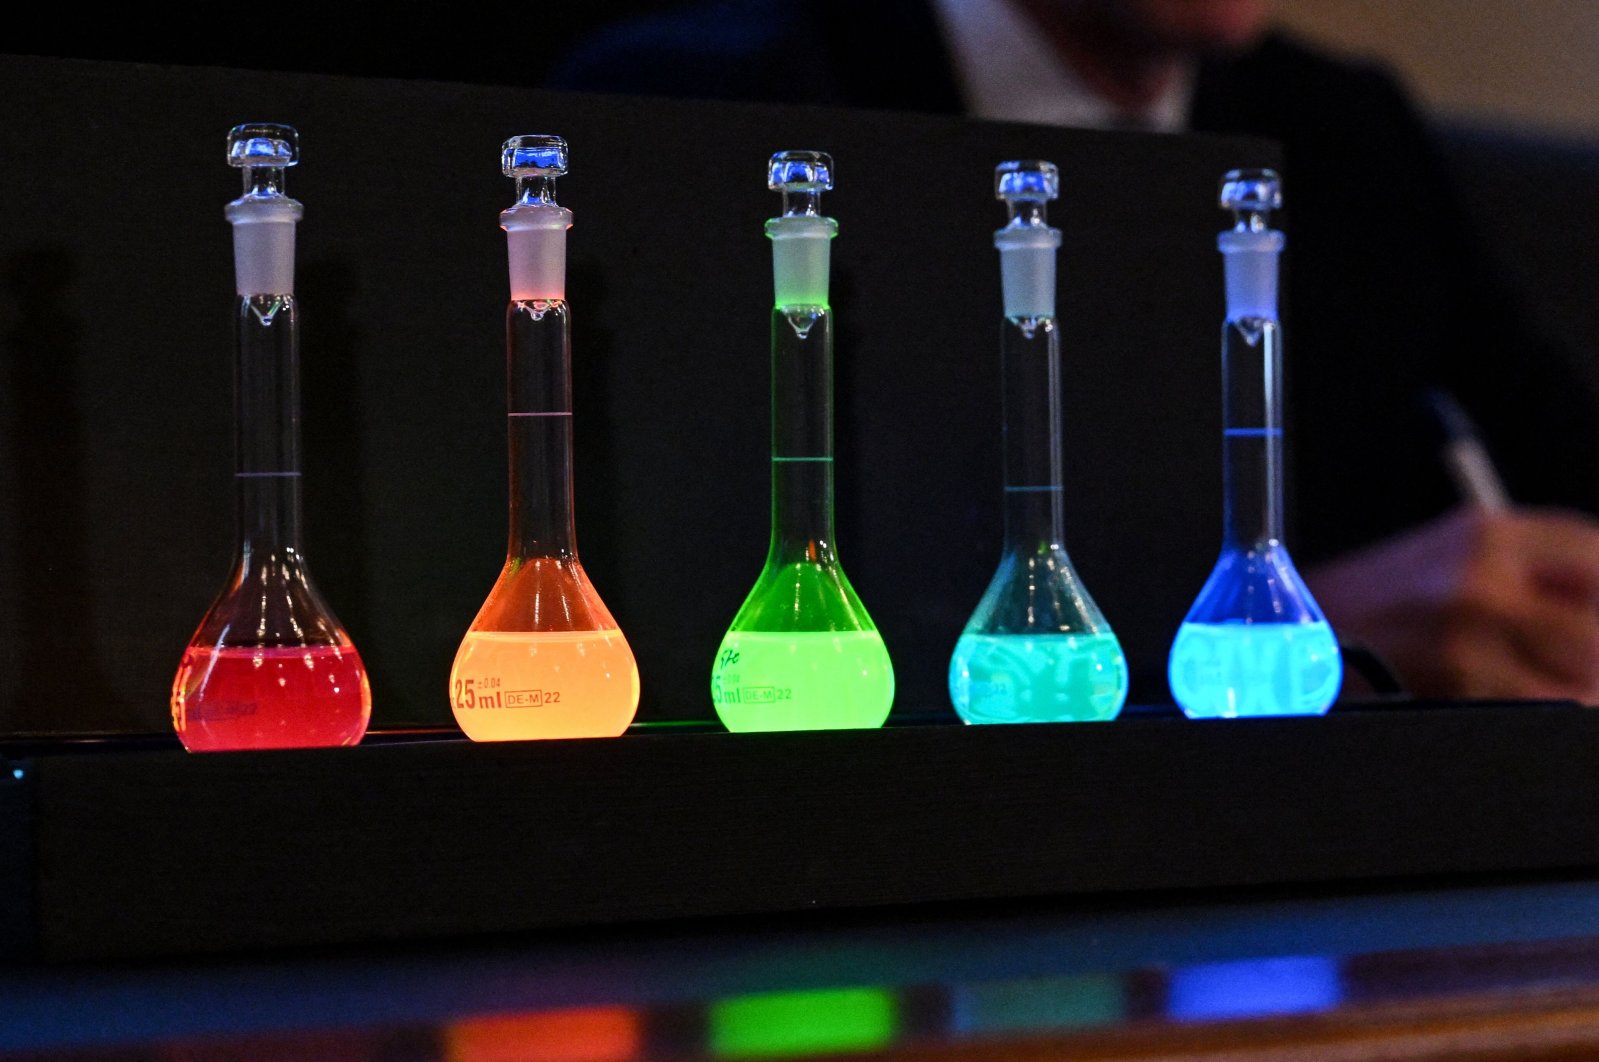 Laboratory flasks are used for explanation during the announcement of the winners of the 2023 Nobel Prize in chemistry at the Royal Swedish Academy of Sciences in Stockholm on Oct. 4, 2023. (AFP Photo)